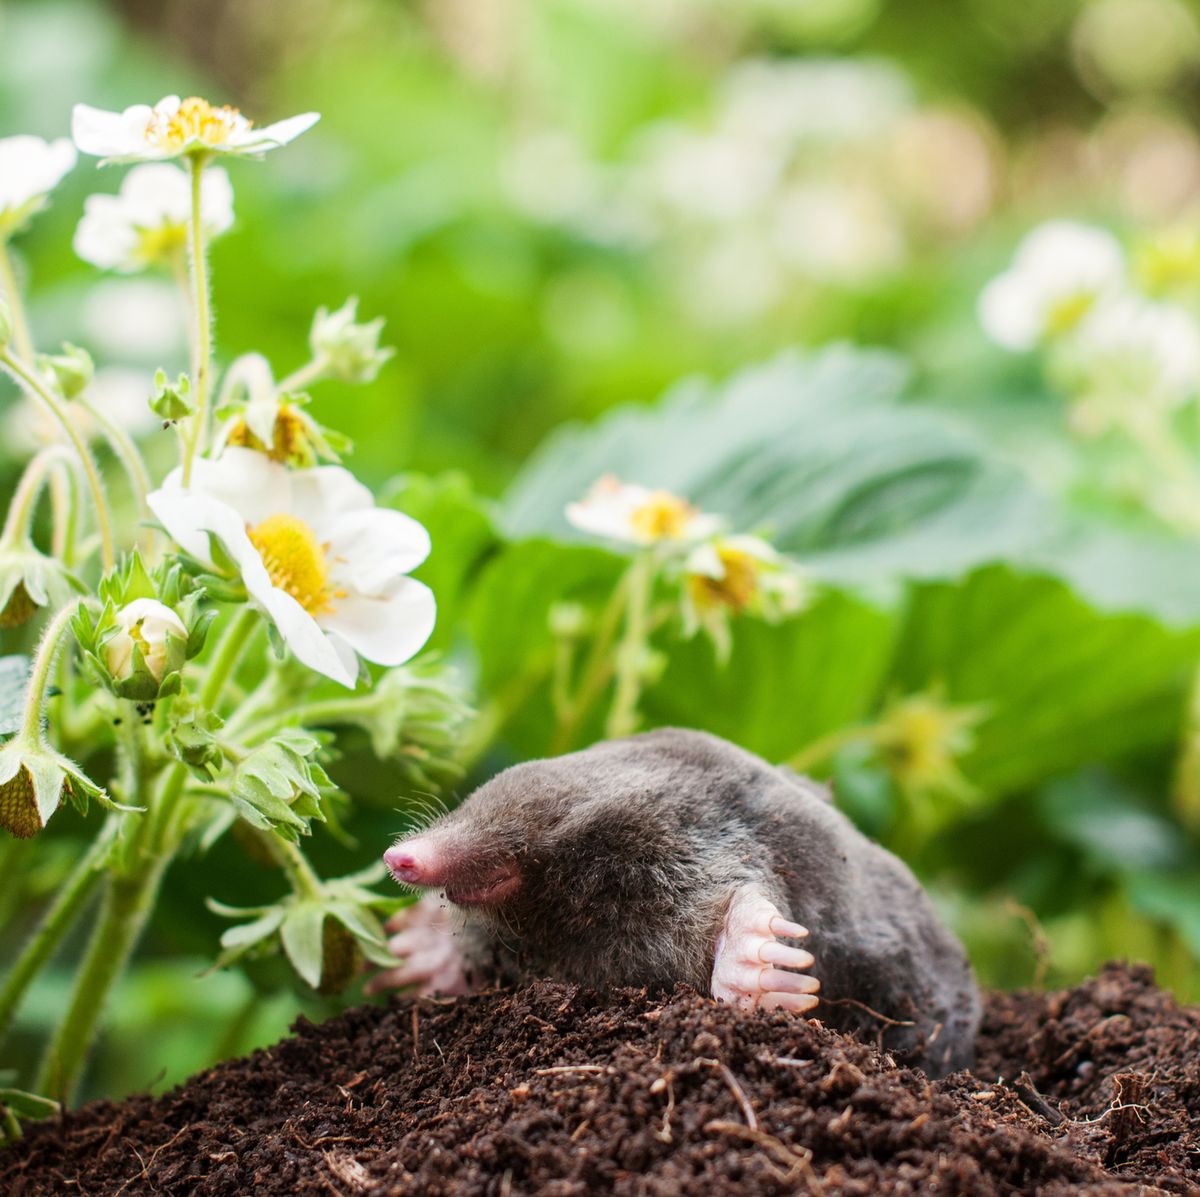 How To Get Rid of Moles In The Garden — Tips And Prevention